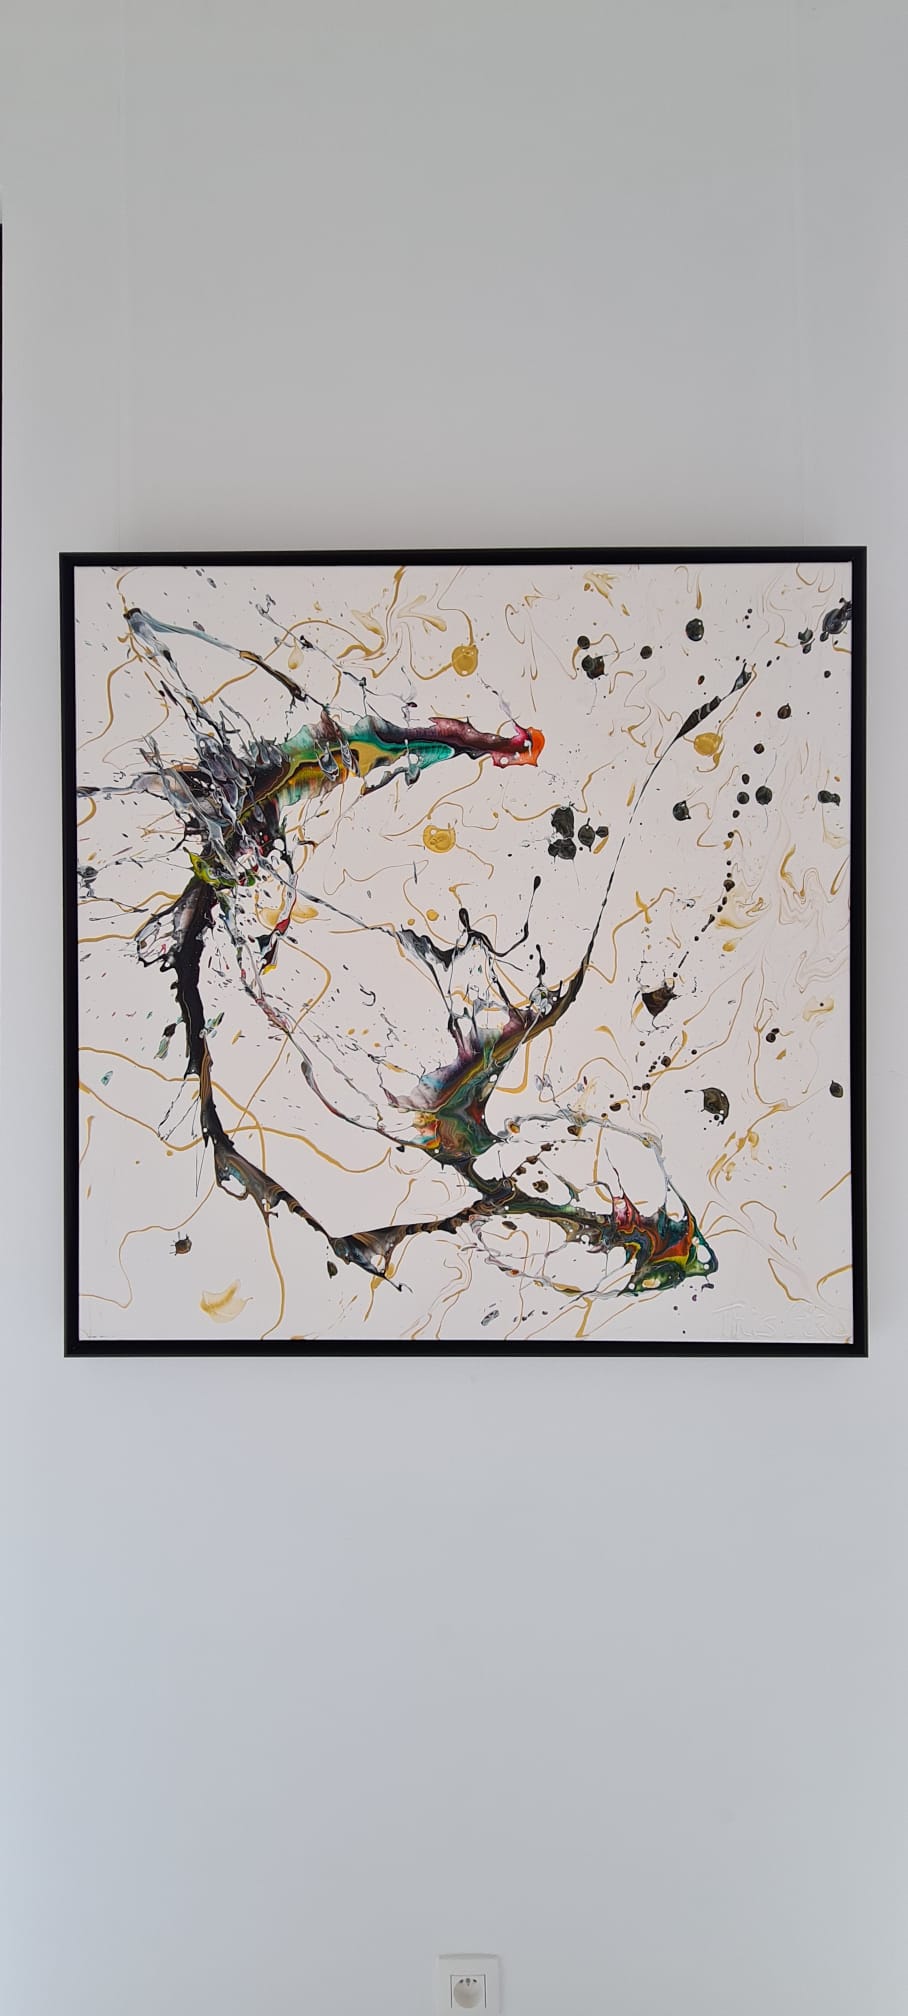 Chinese Dragon - Resin with acrylics on canvas - 100x100cm - 2250 euro (framed)